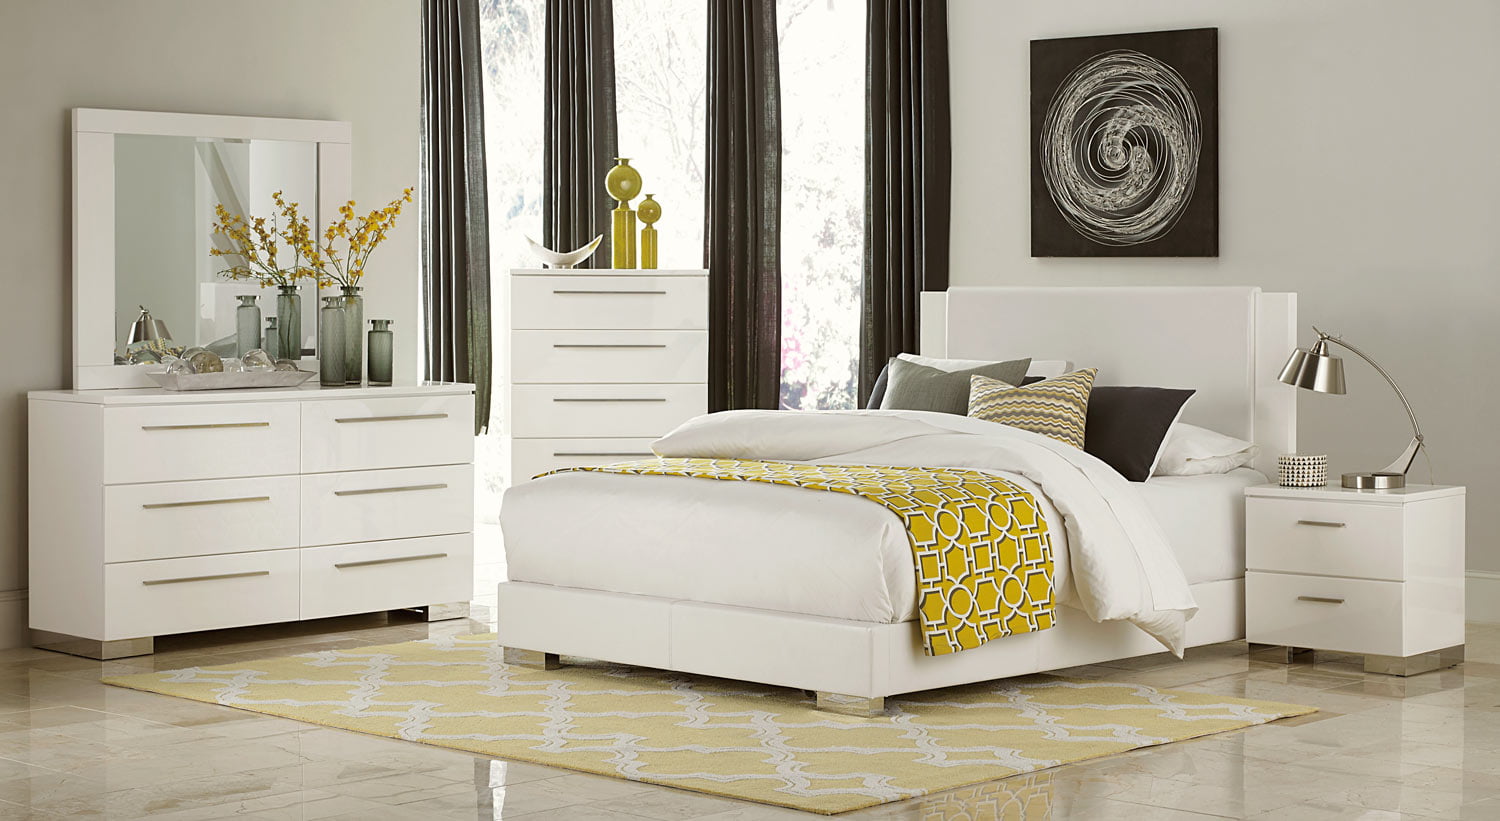 white lacquer bedroom furniture uk